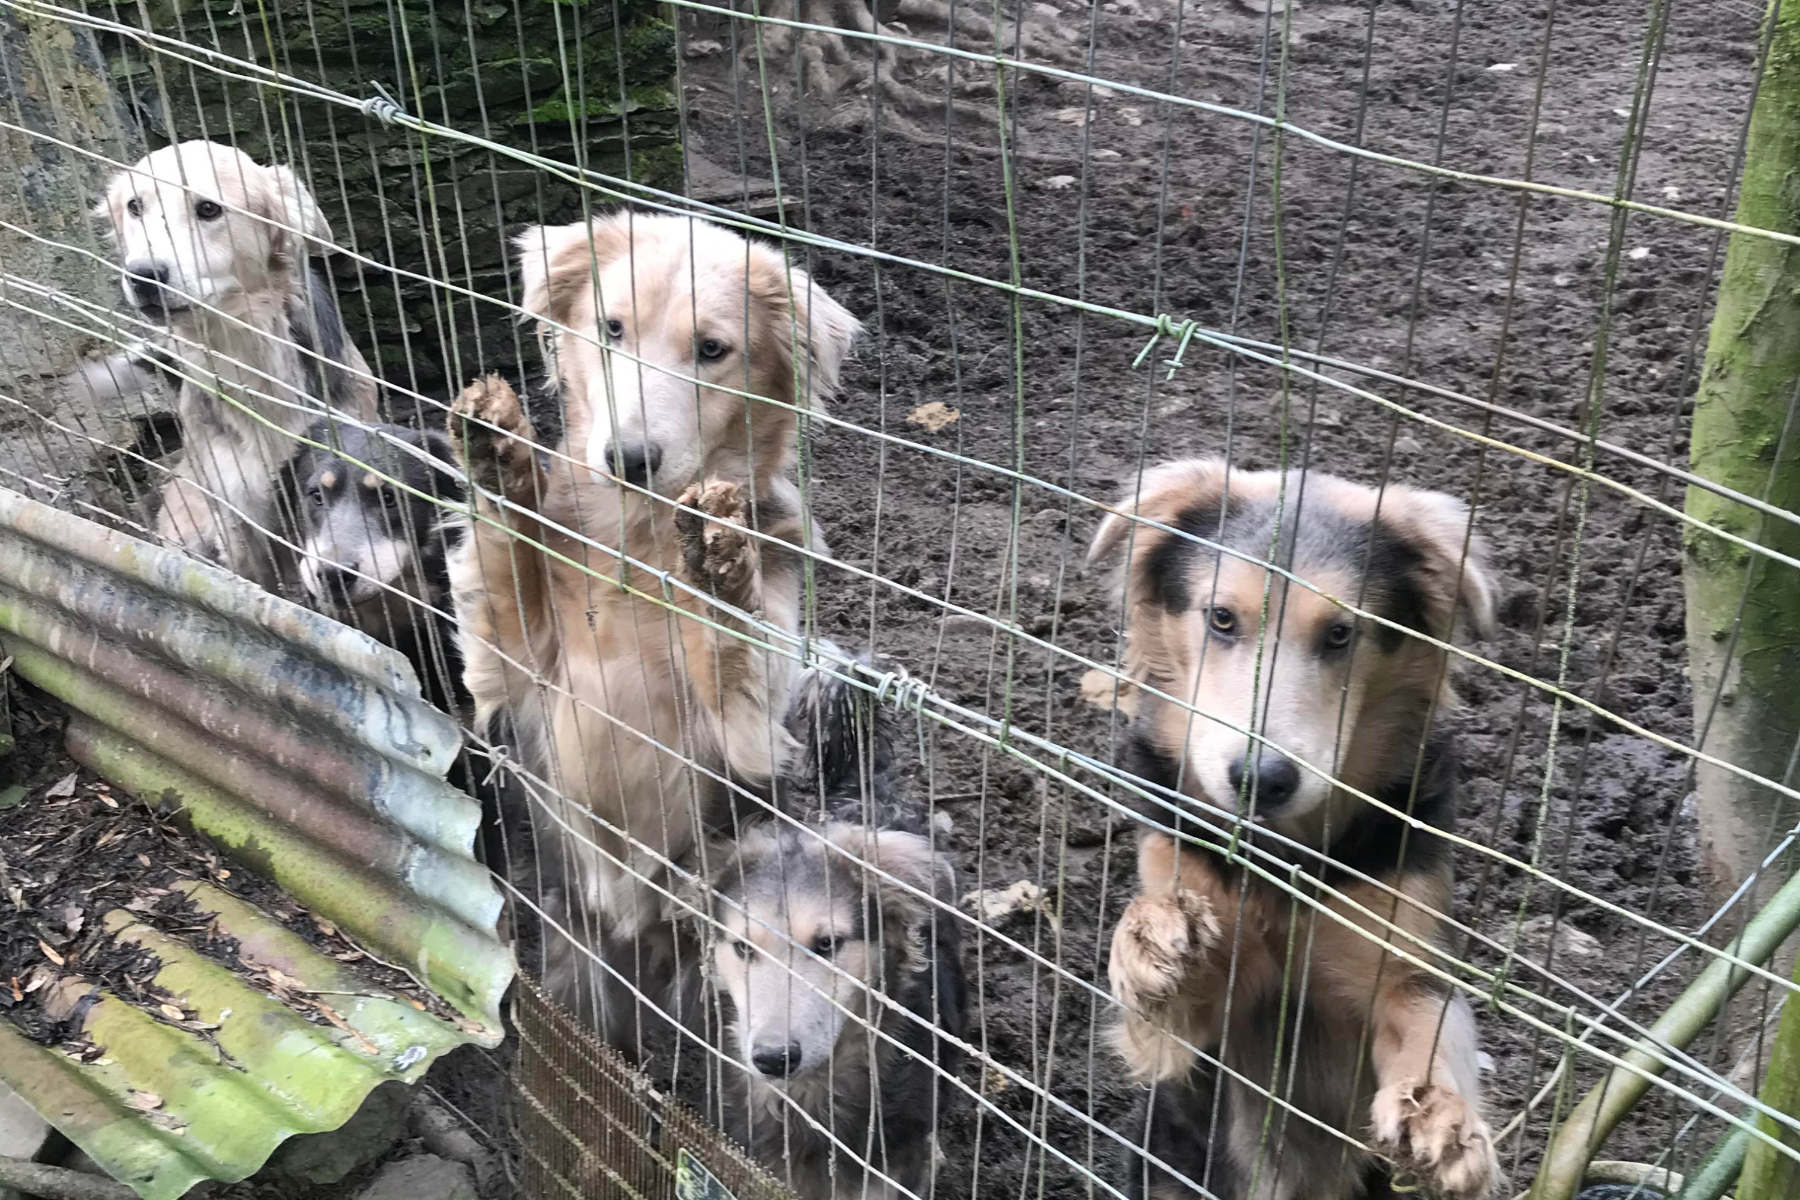 Rspca Rescues 45 Dogs From ‘out Of Control Conditions On Farm